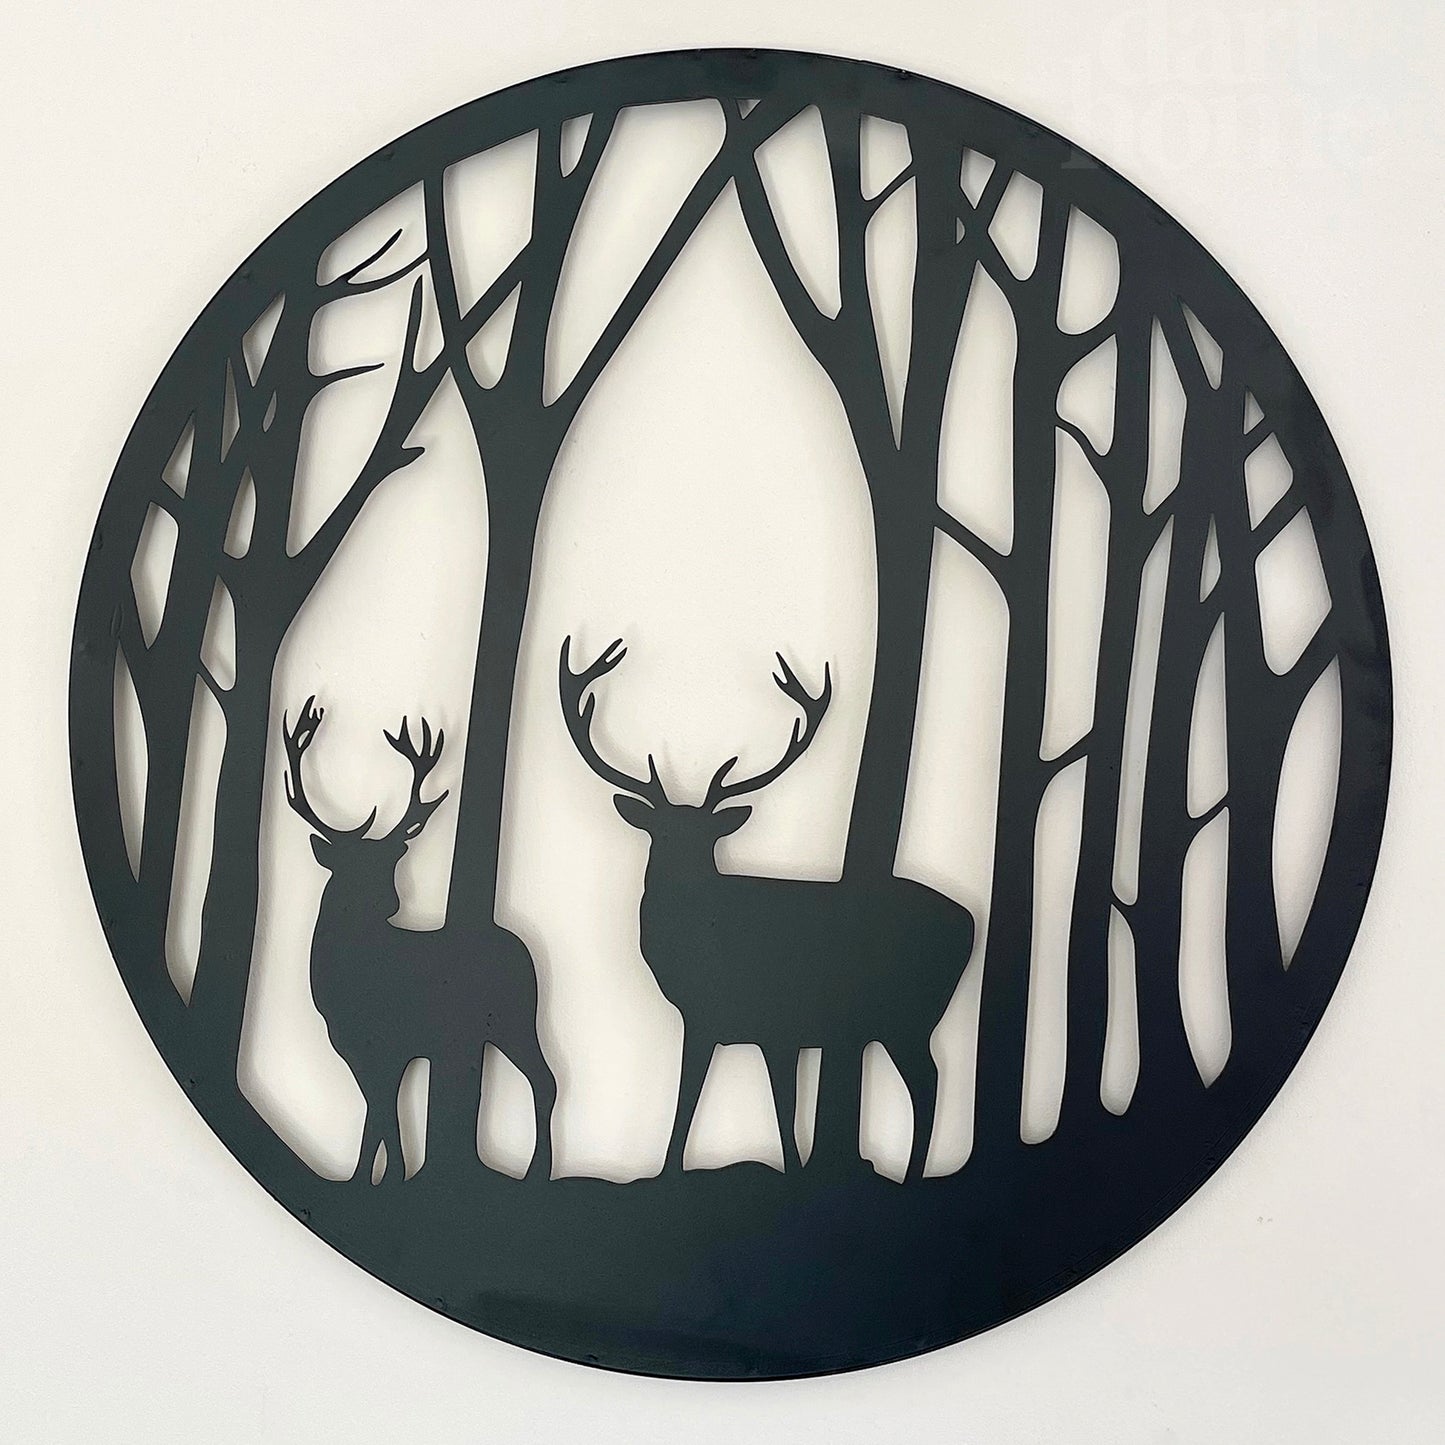 Black Stags In Forest Silhouette Wall Art